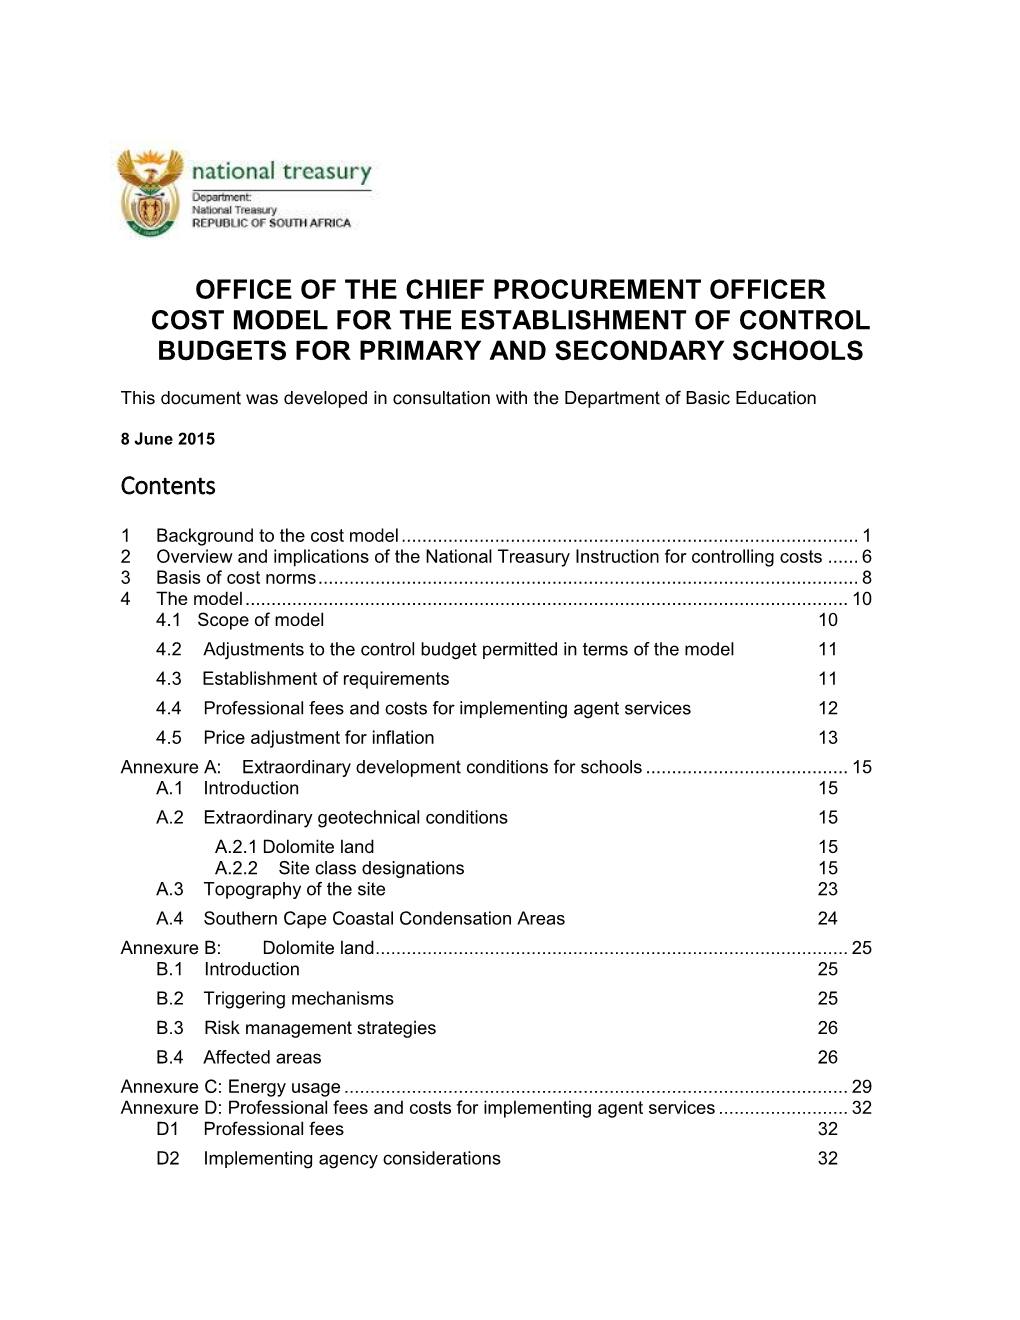 OFFICE of the CHIEF PROCUREMENT OFFICER COST MODEL for the ESTABLISHMENT of CONTROL BUDGETS for PRIMARY and SECONDARY SCHOOLS Co